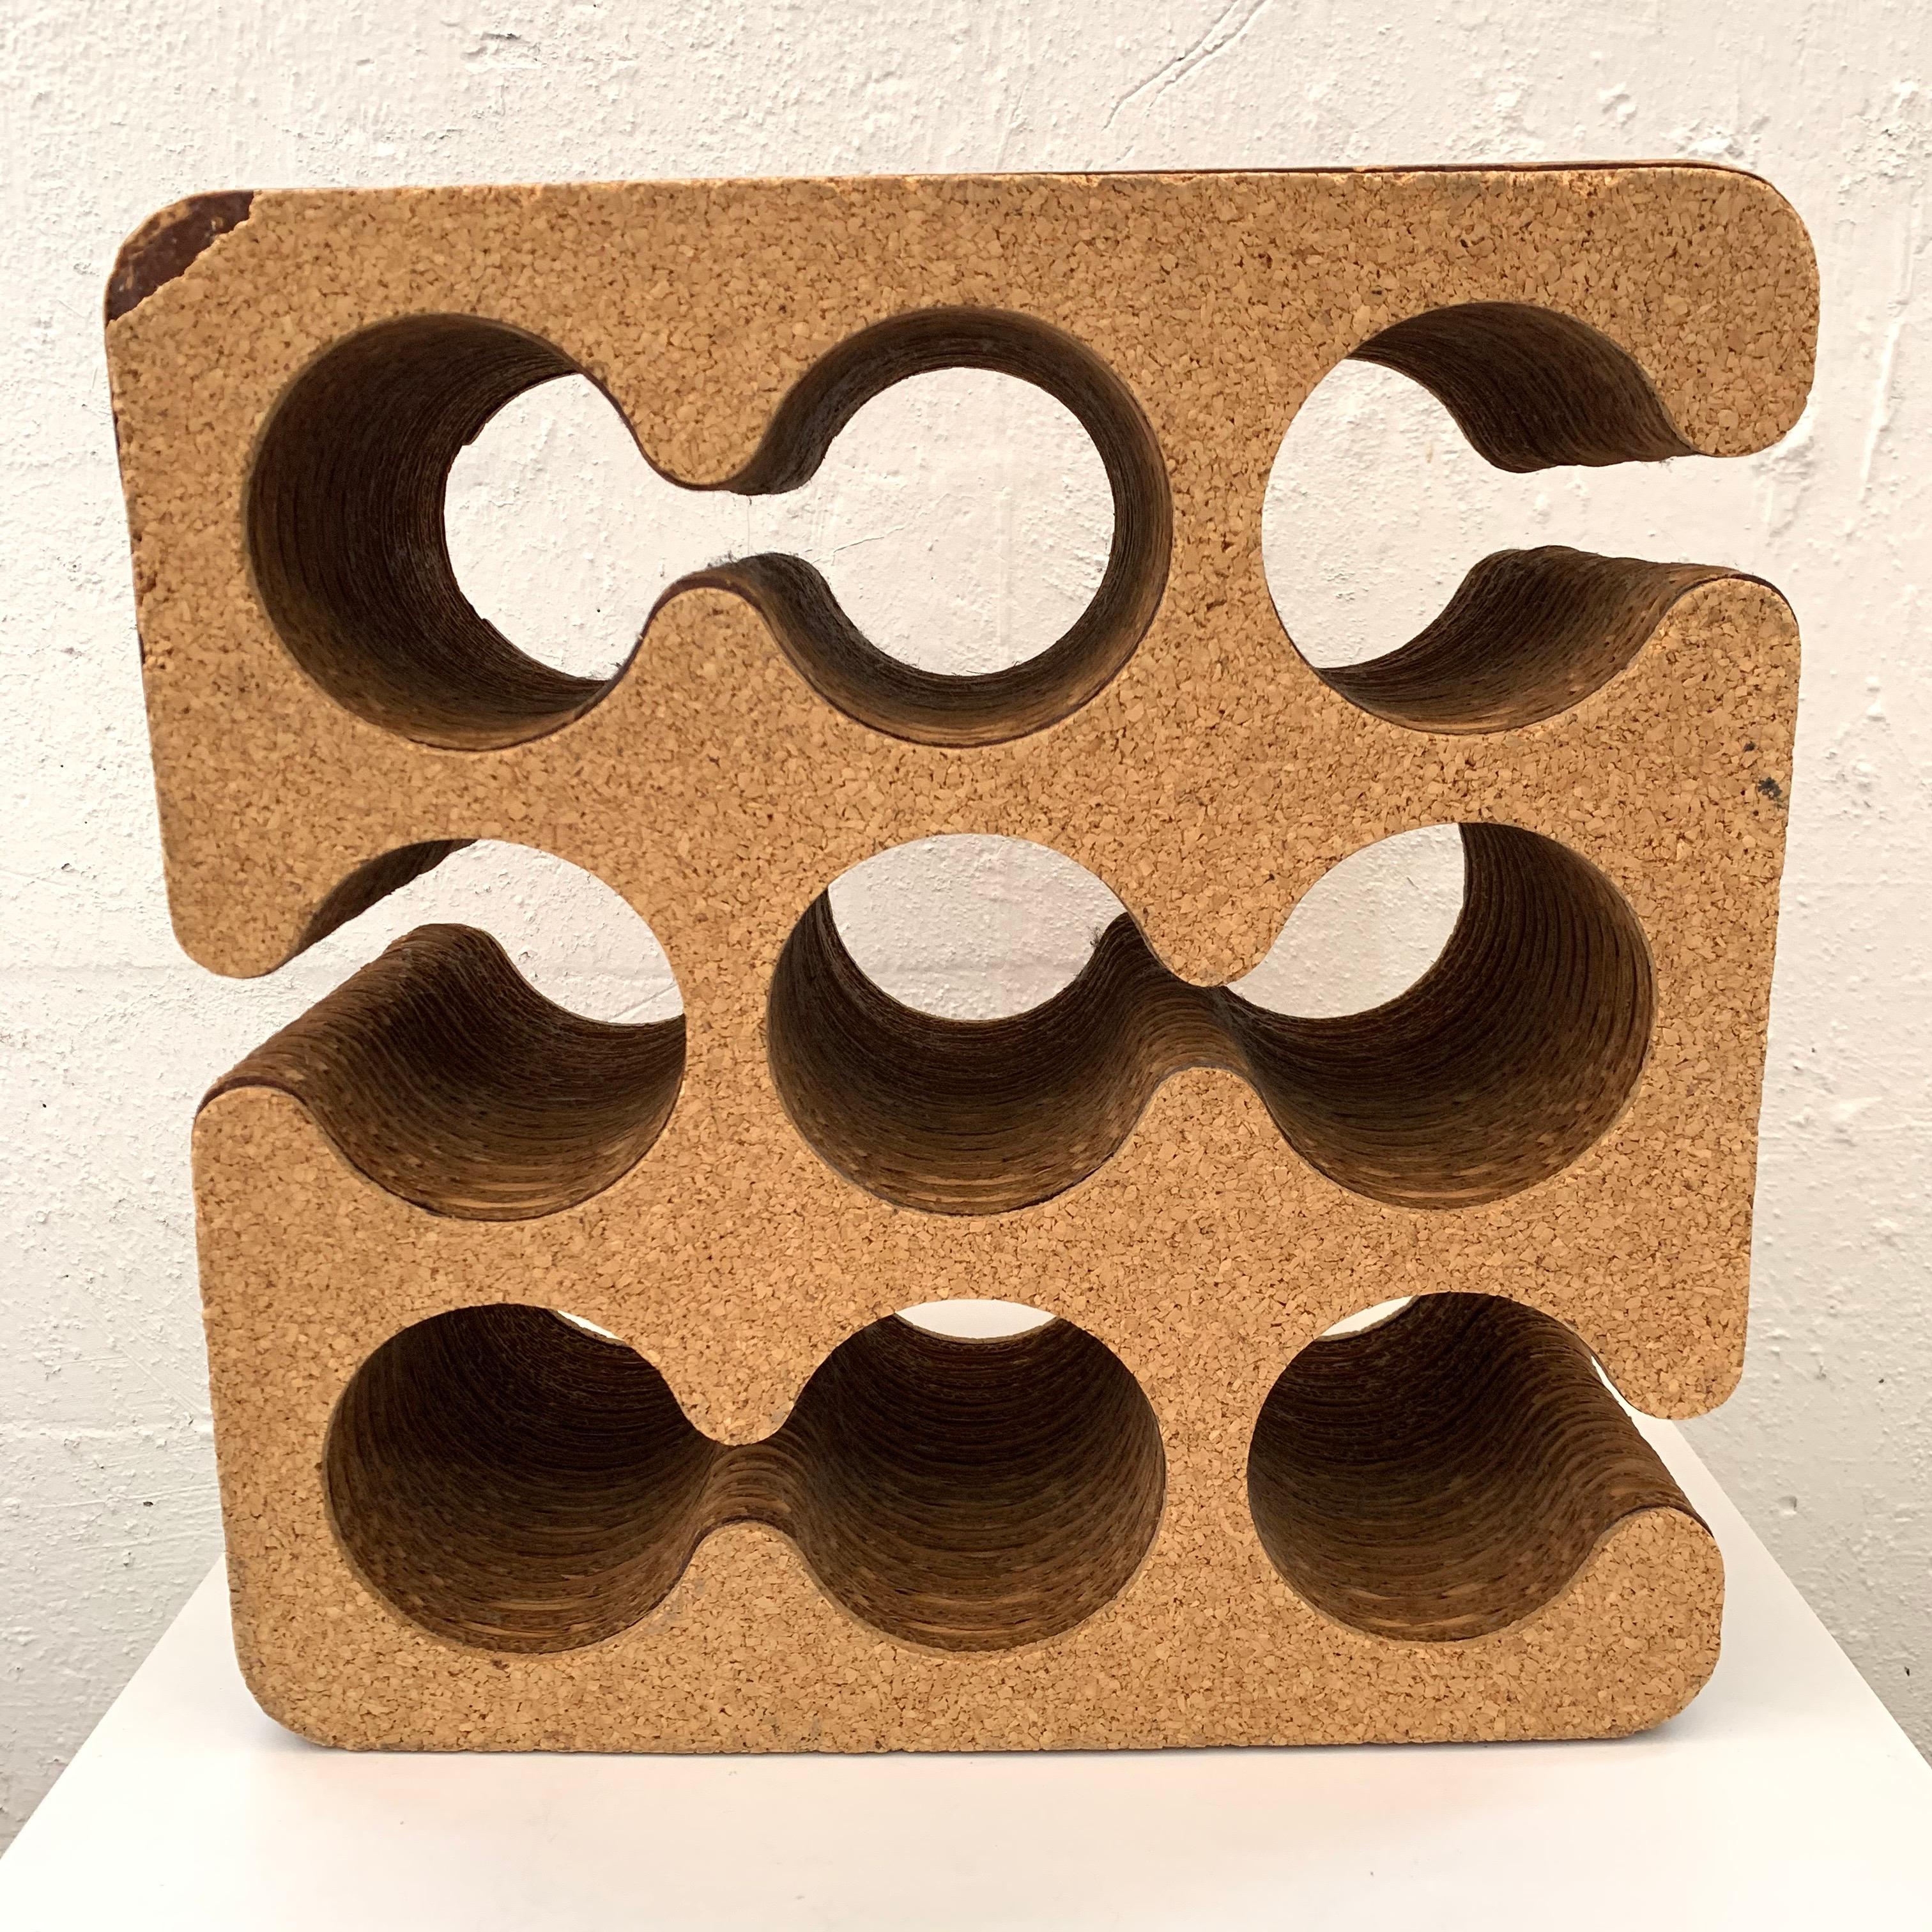 Postmodern sculptural 9 bottle wine rack of holder rendered in corrugated card board with cork exterior designed by Frank Gehry for his Easy Edges line, 1980s.